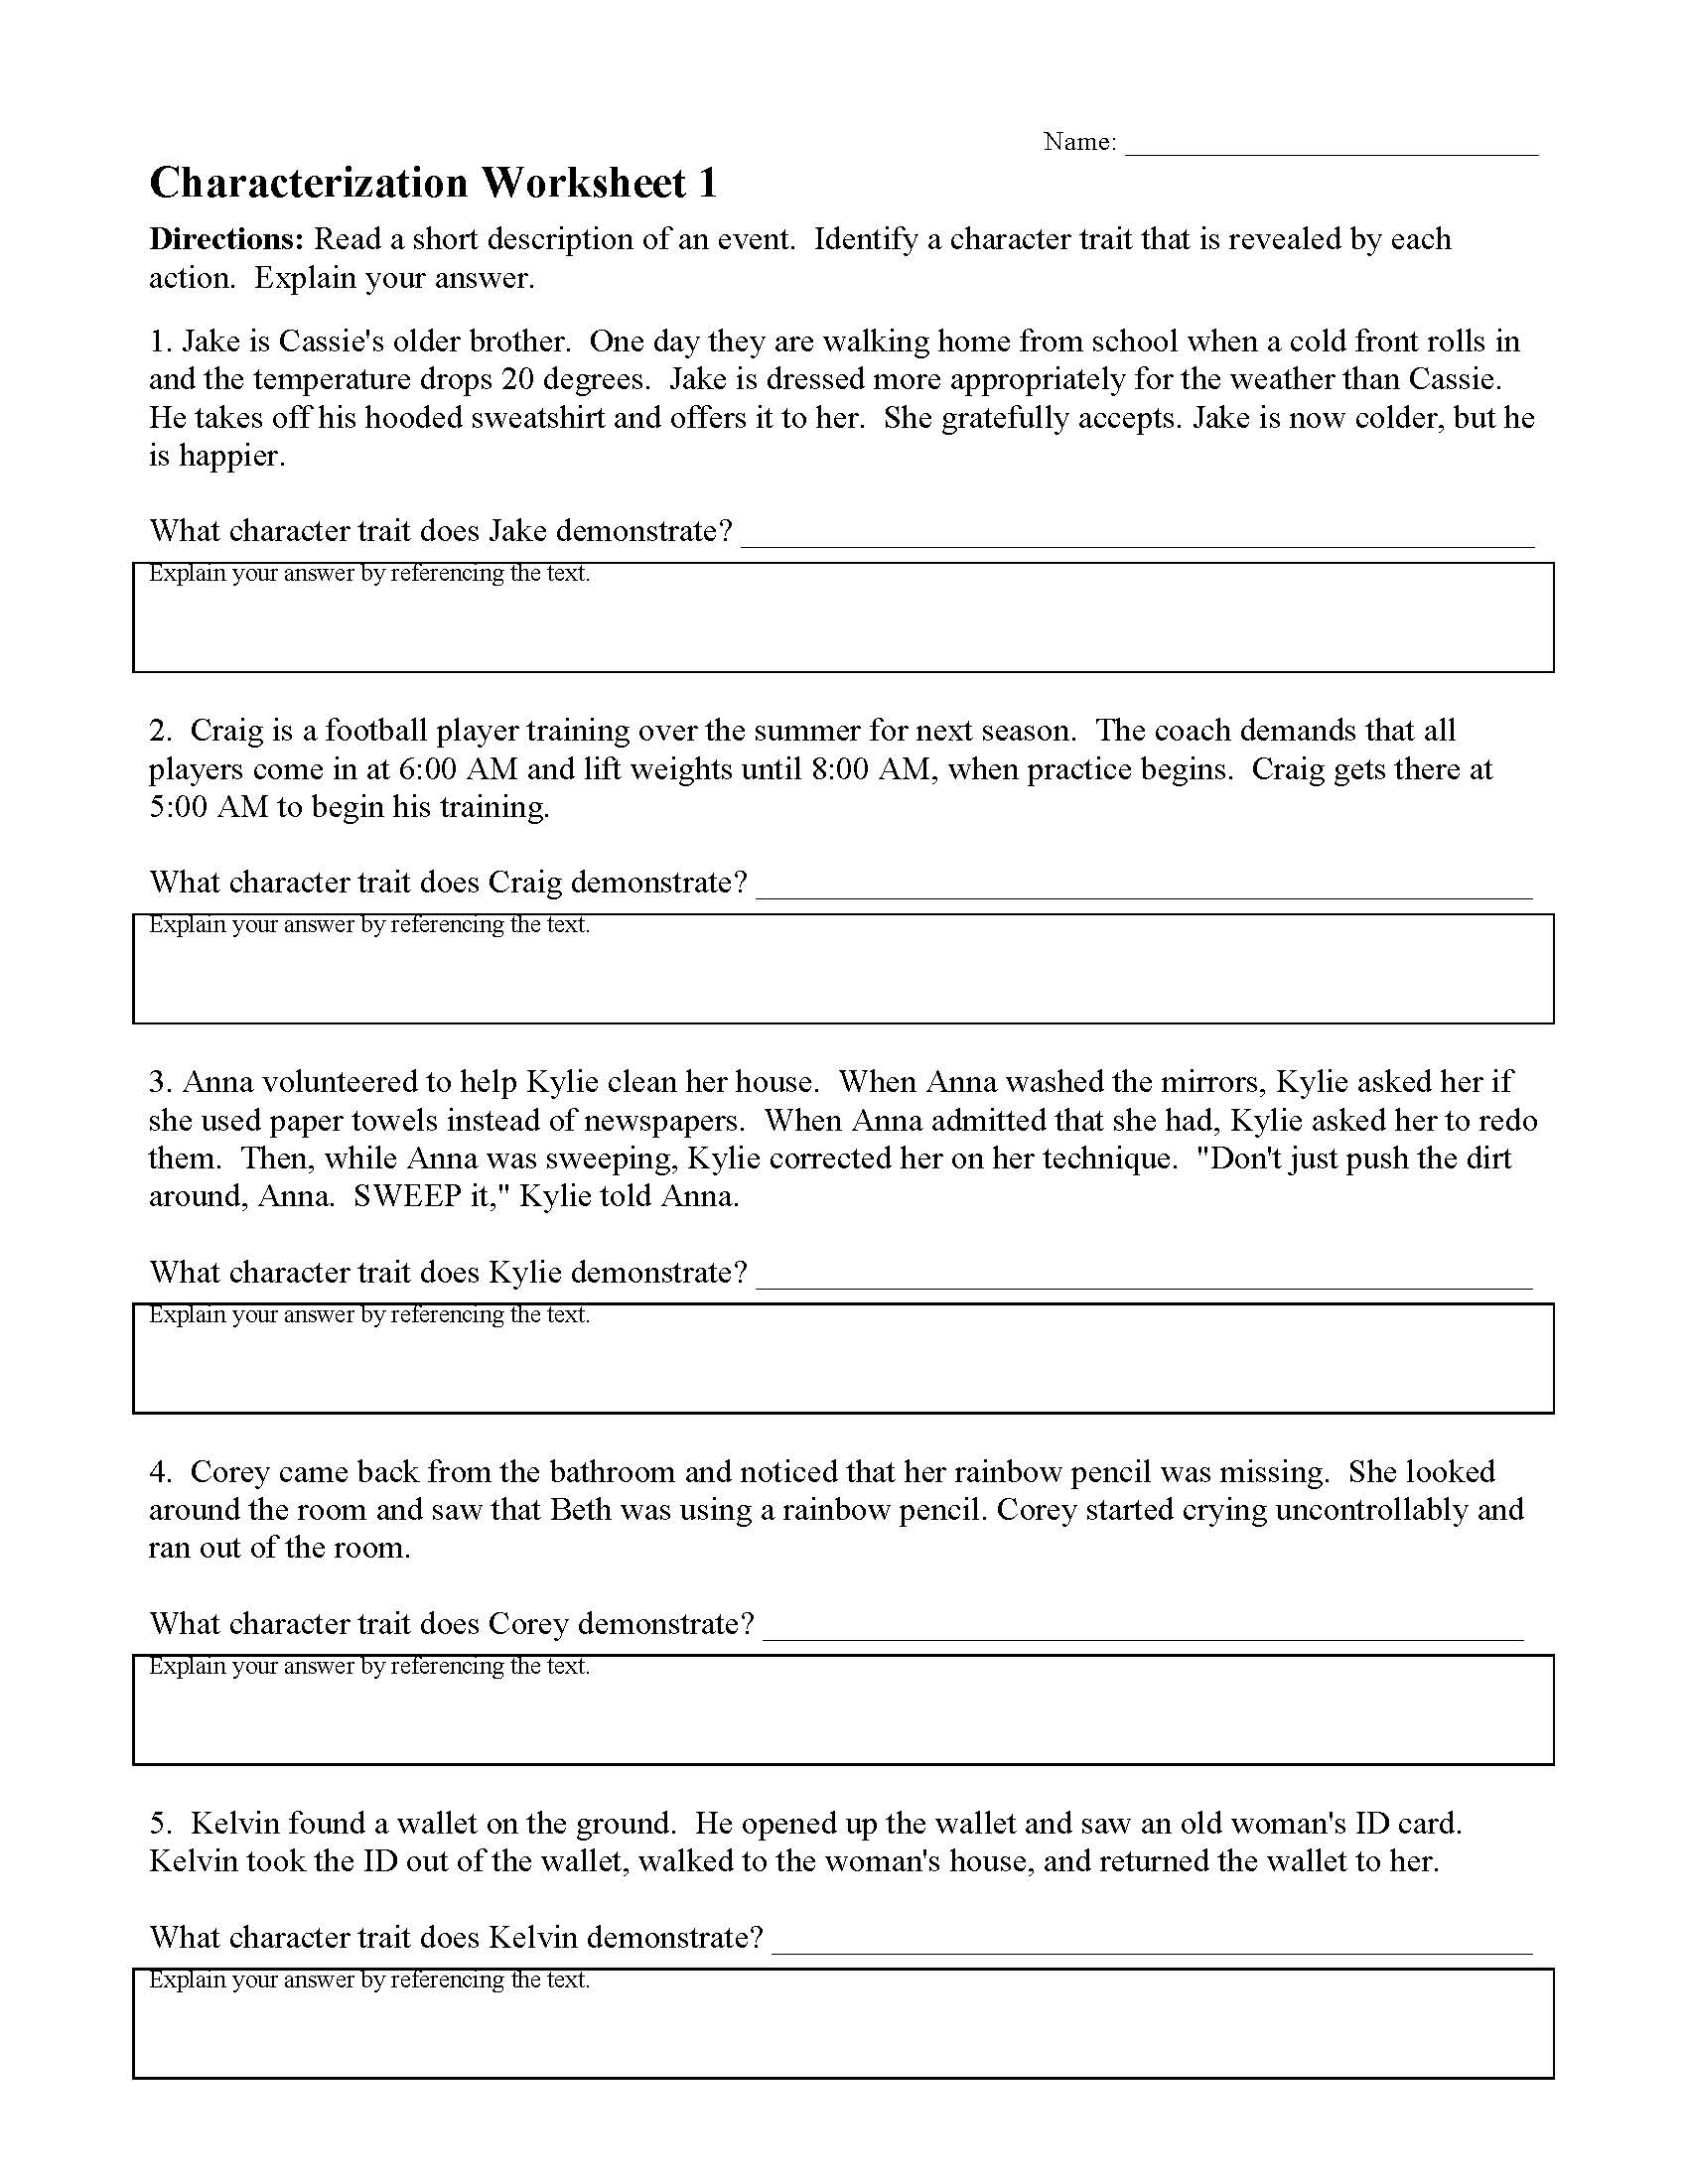 Characterization Worksheet 1 | Preview